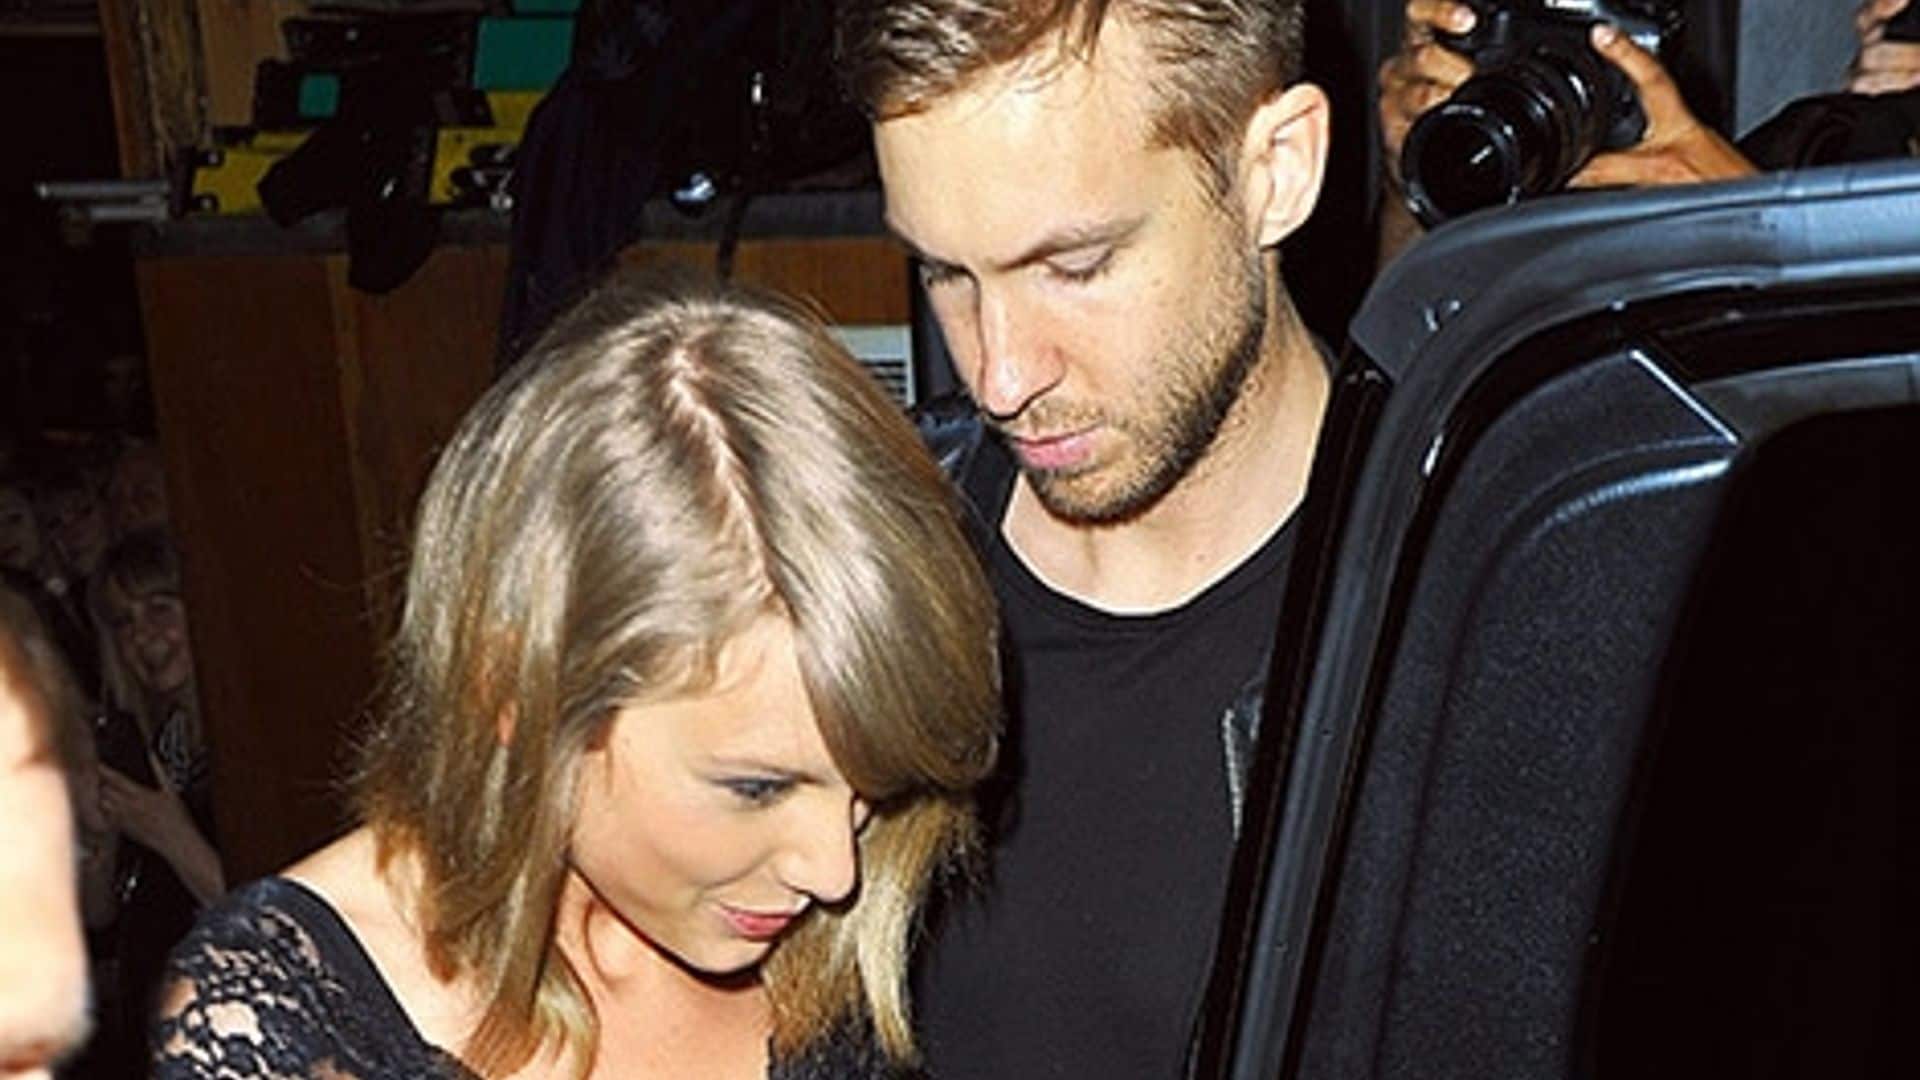 Taylor Swift and Calvin Harris enjoy night out together at HAIM concert